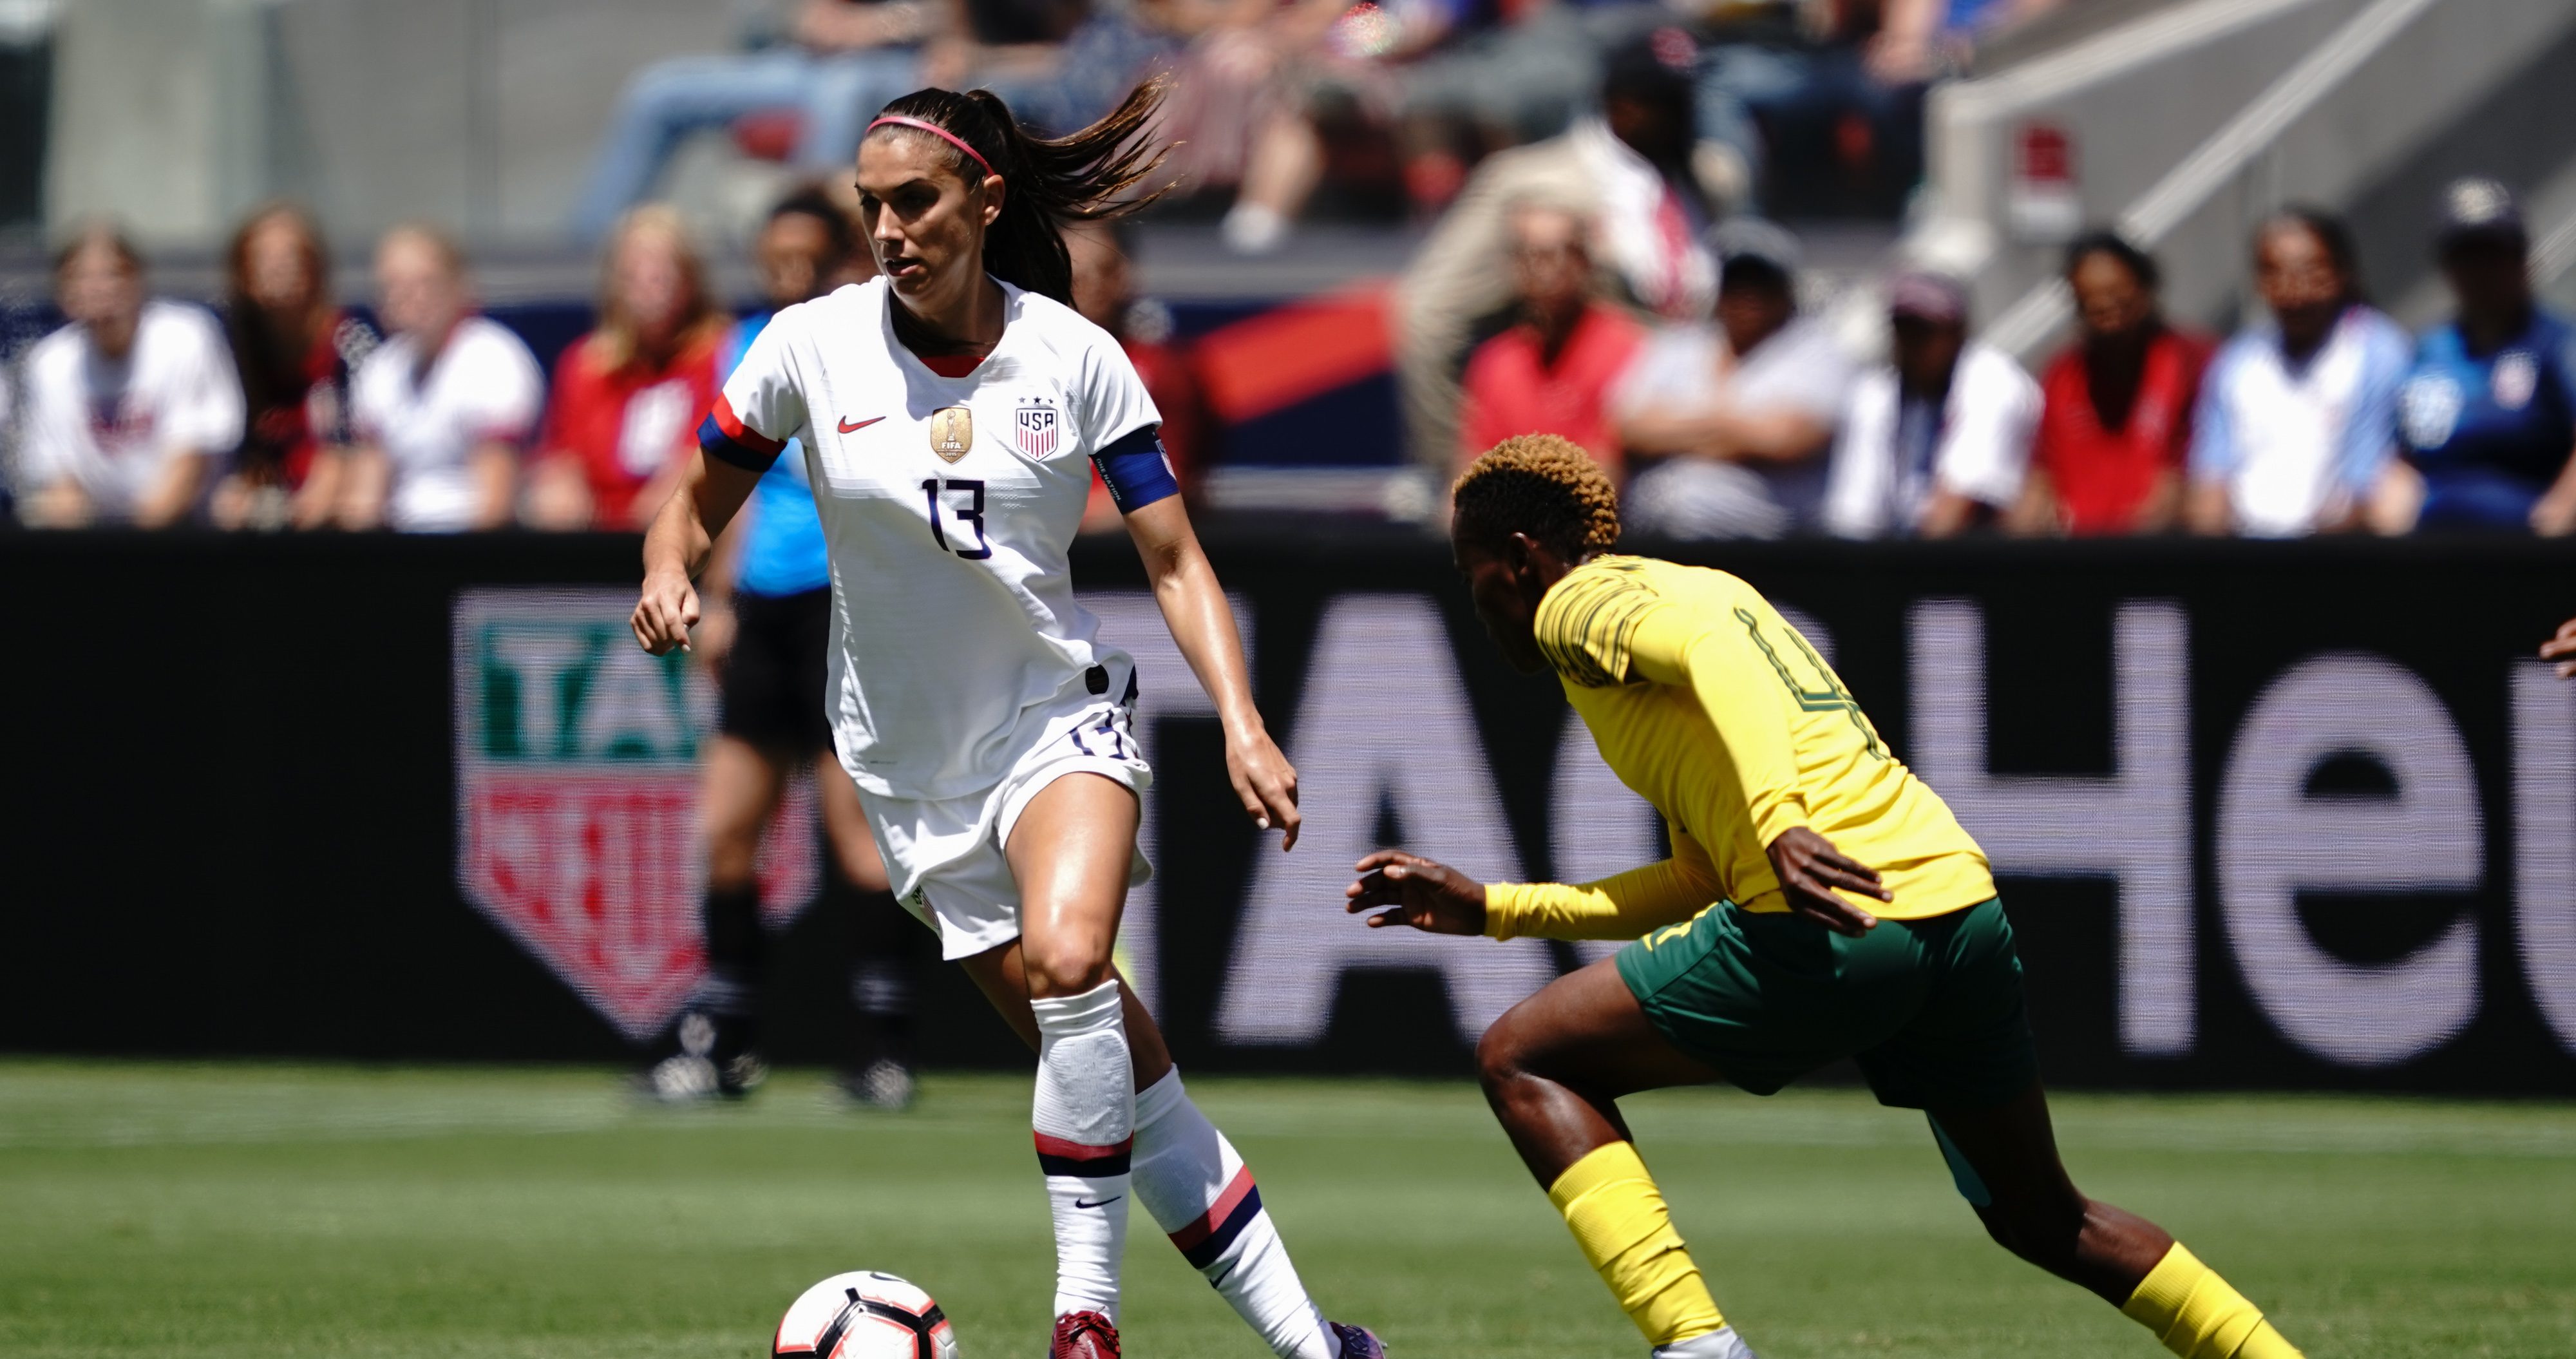 Soccer.com Signed USWNT Home Jersey Giveaway